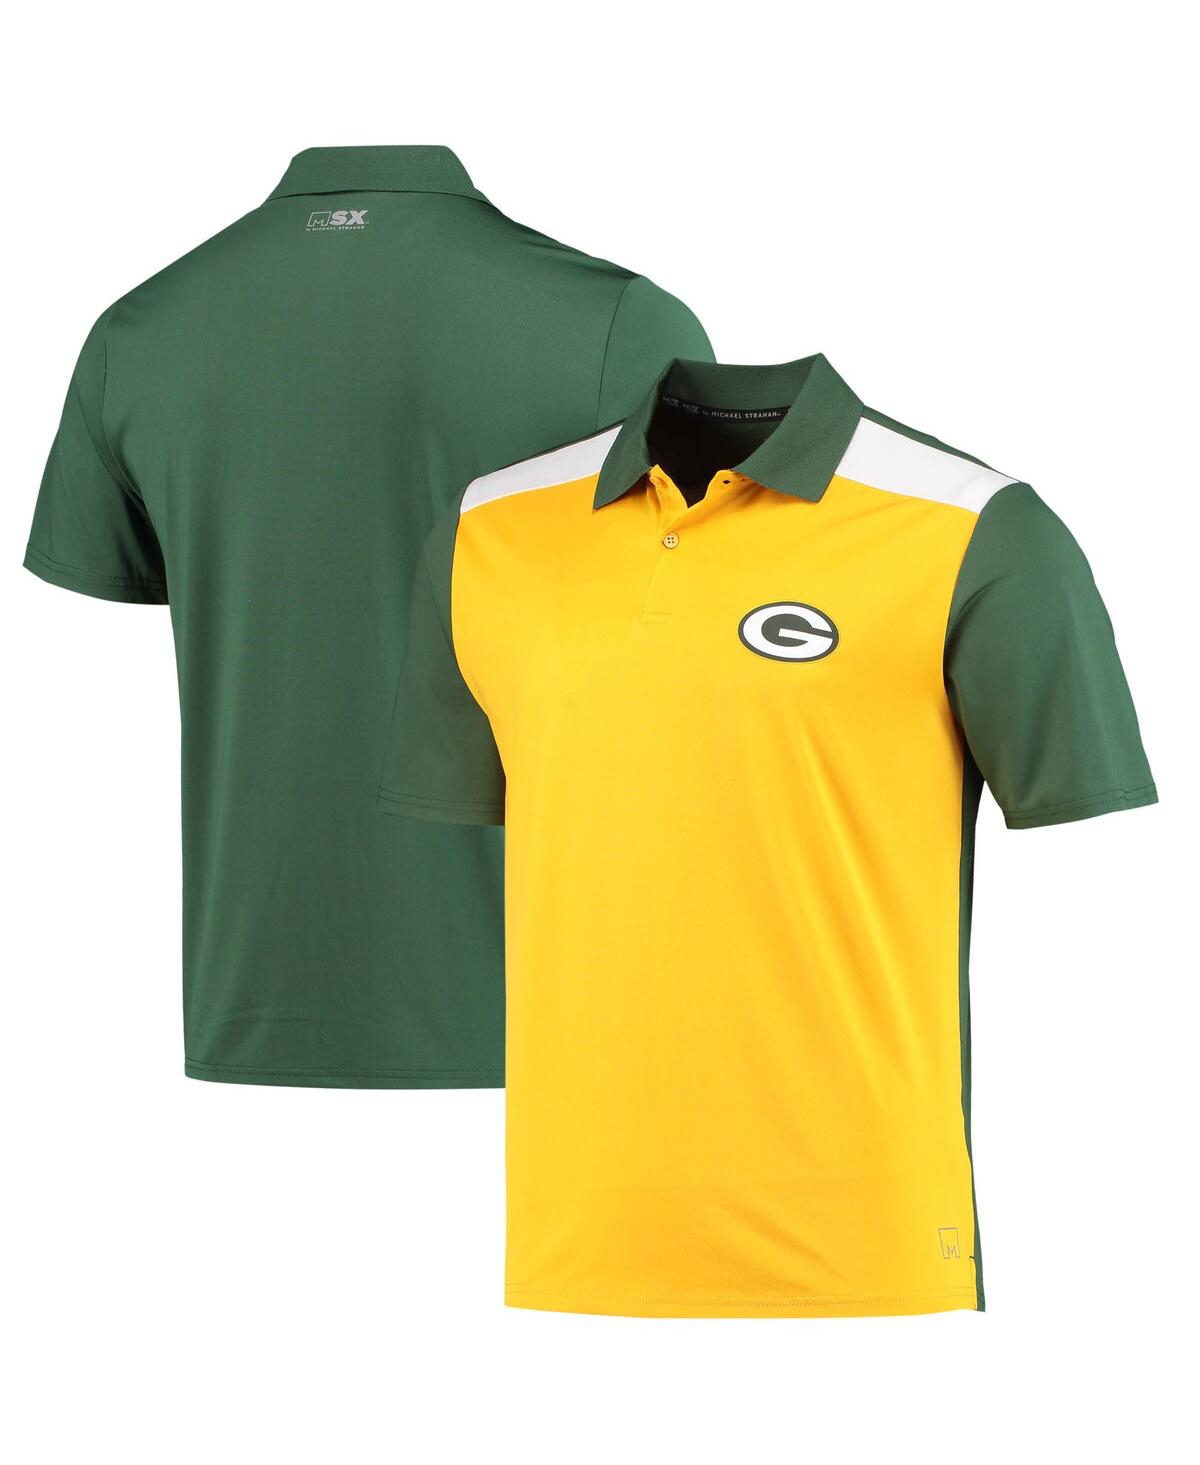 Msx By Michael Strahan Men's  Gold, Green Green Bay Packers Challenge Color Block Performance Polo Sh In Gold,green